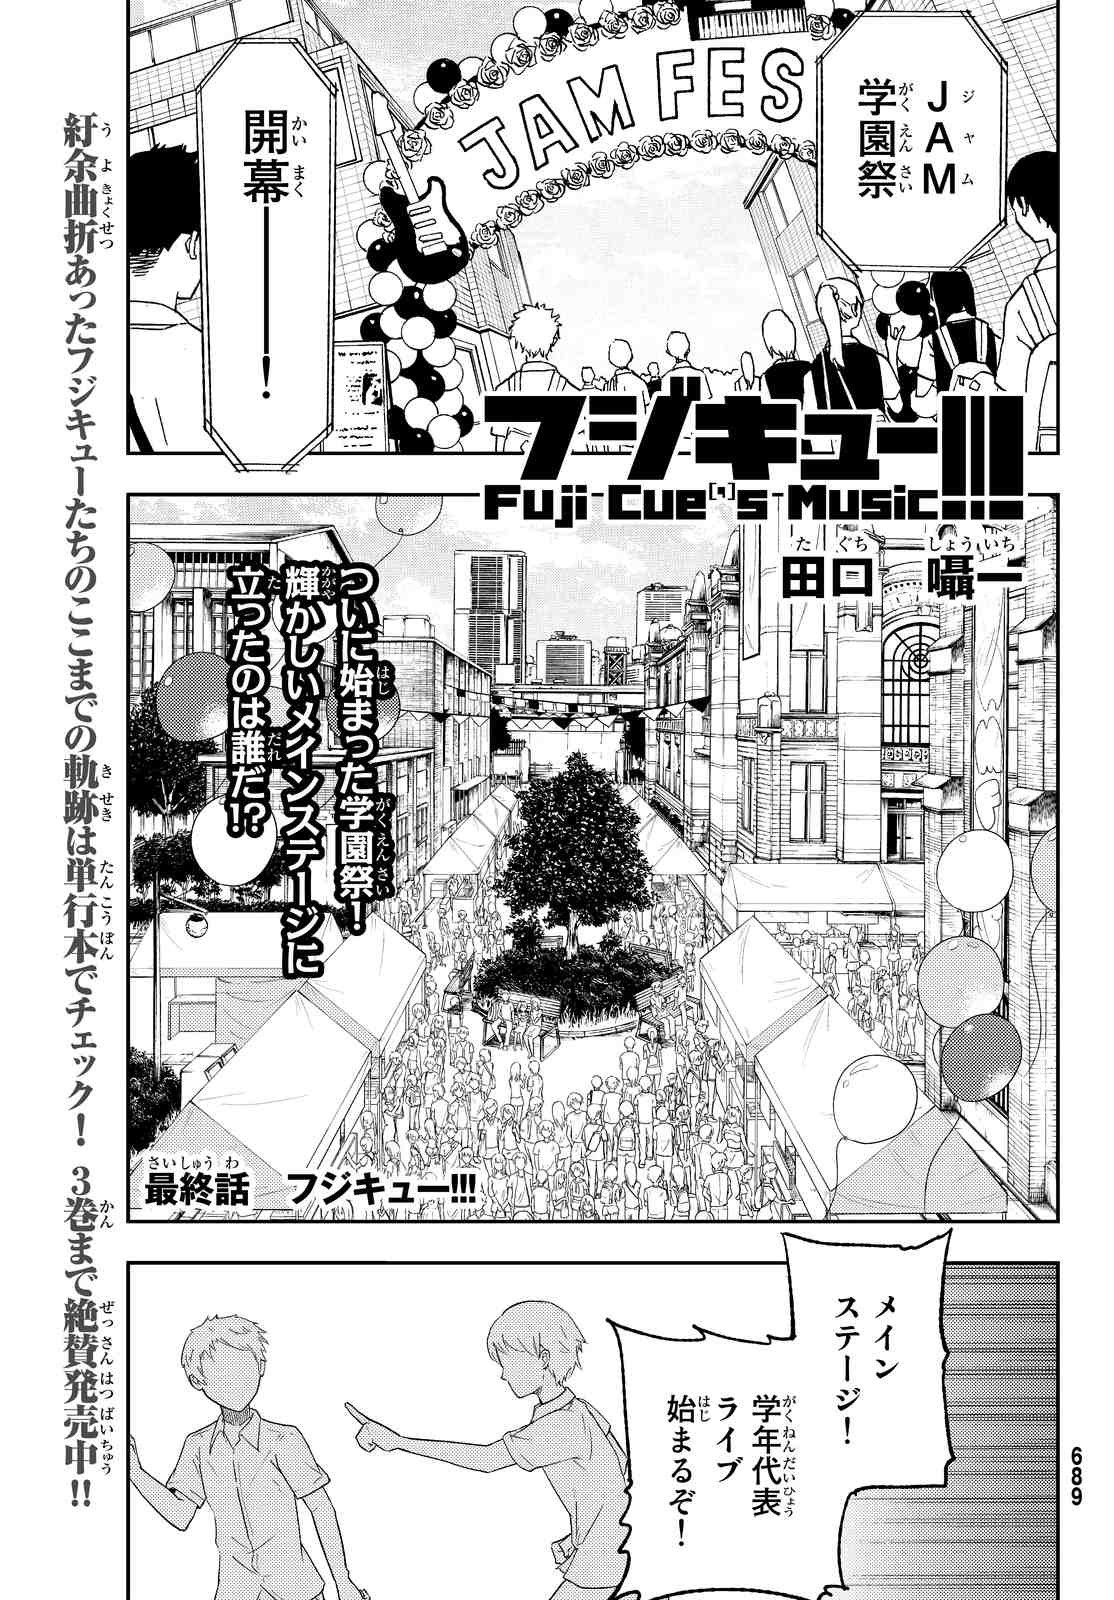 Fuji Cue's Music - Chapter Final - Page 1